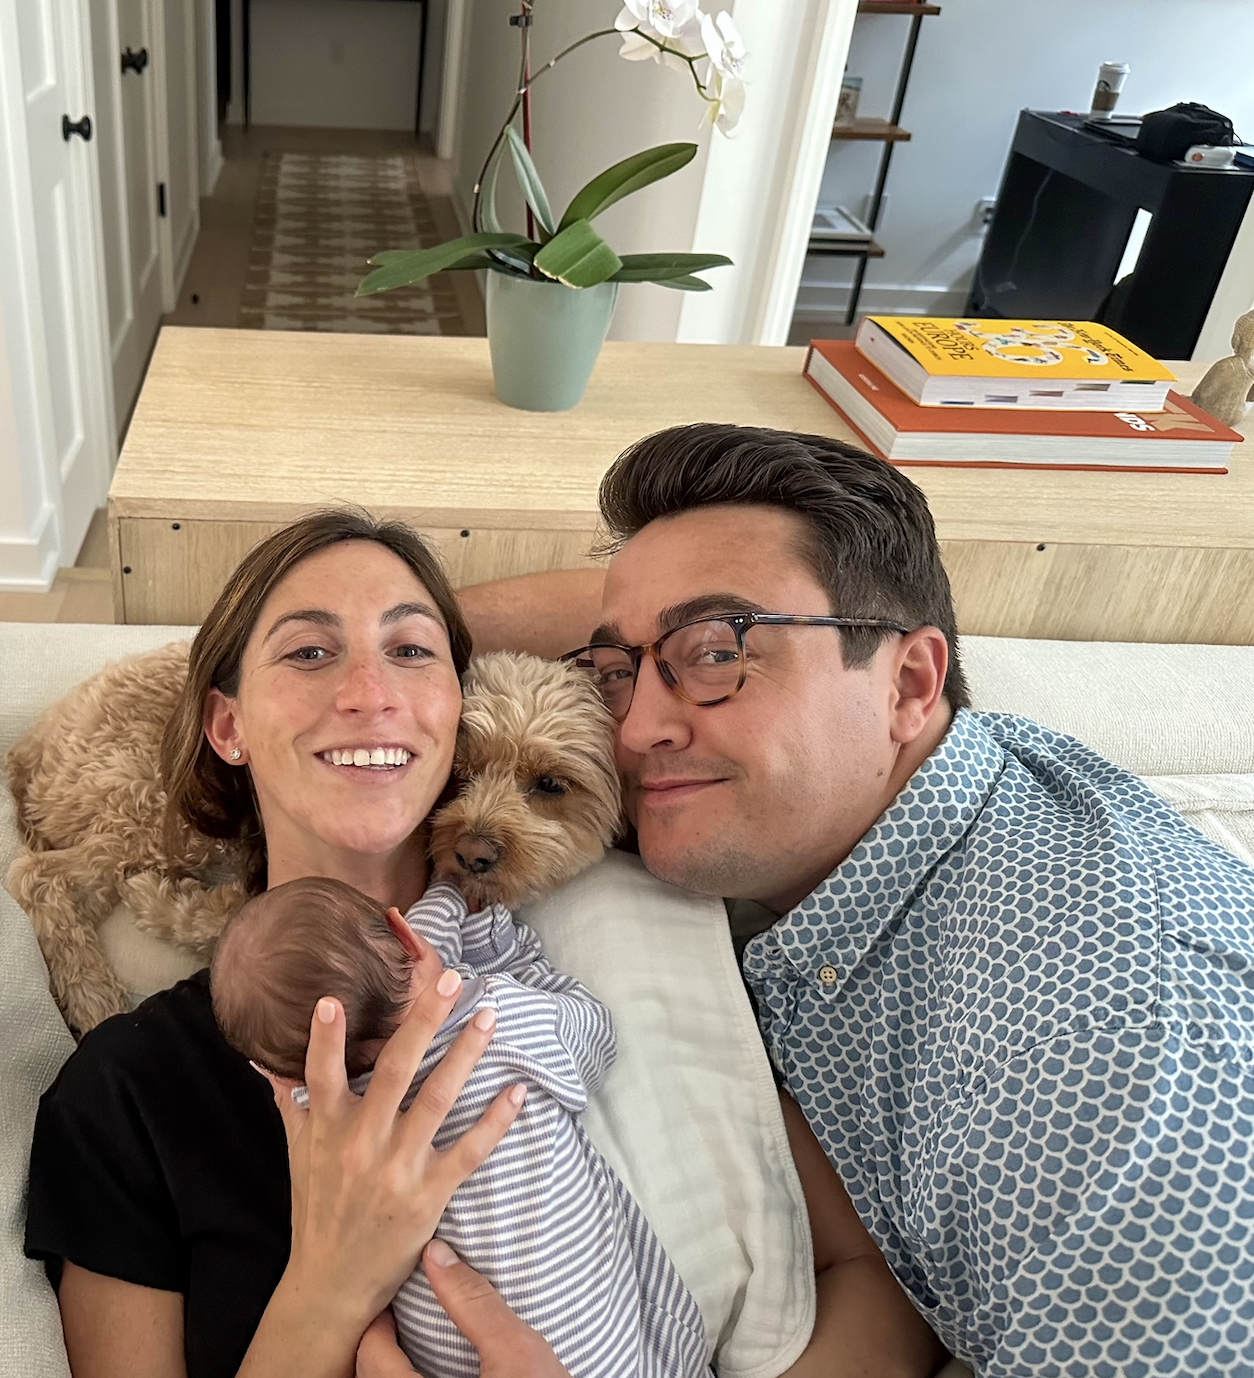 Family portrait with two adults, a baby, and a dog, lounging together and smiling